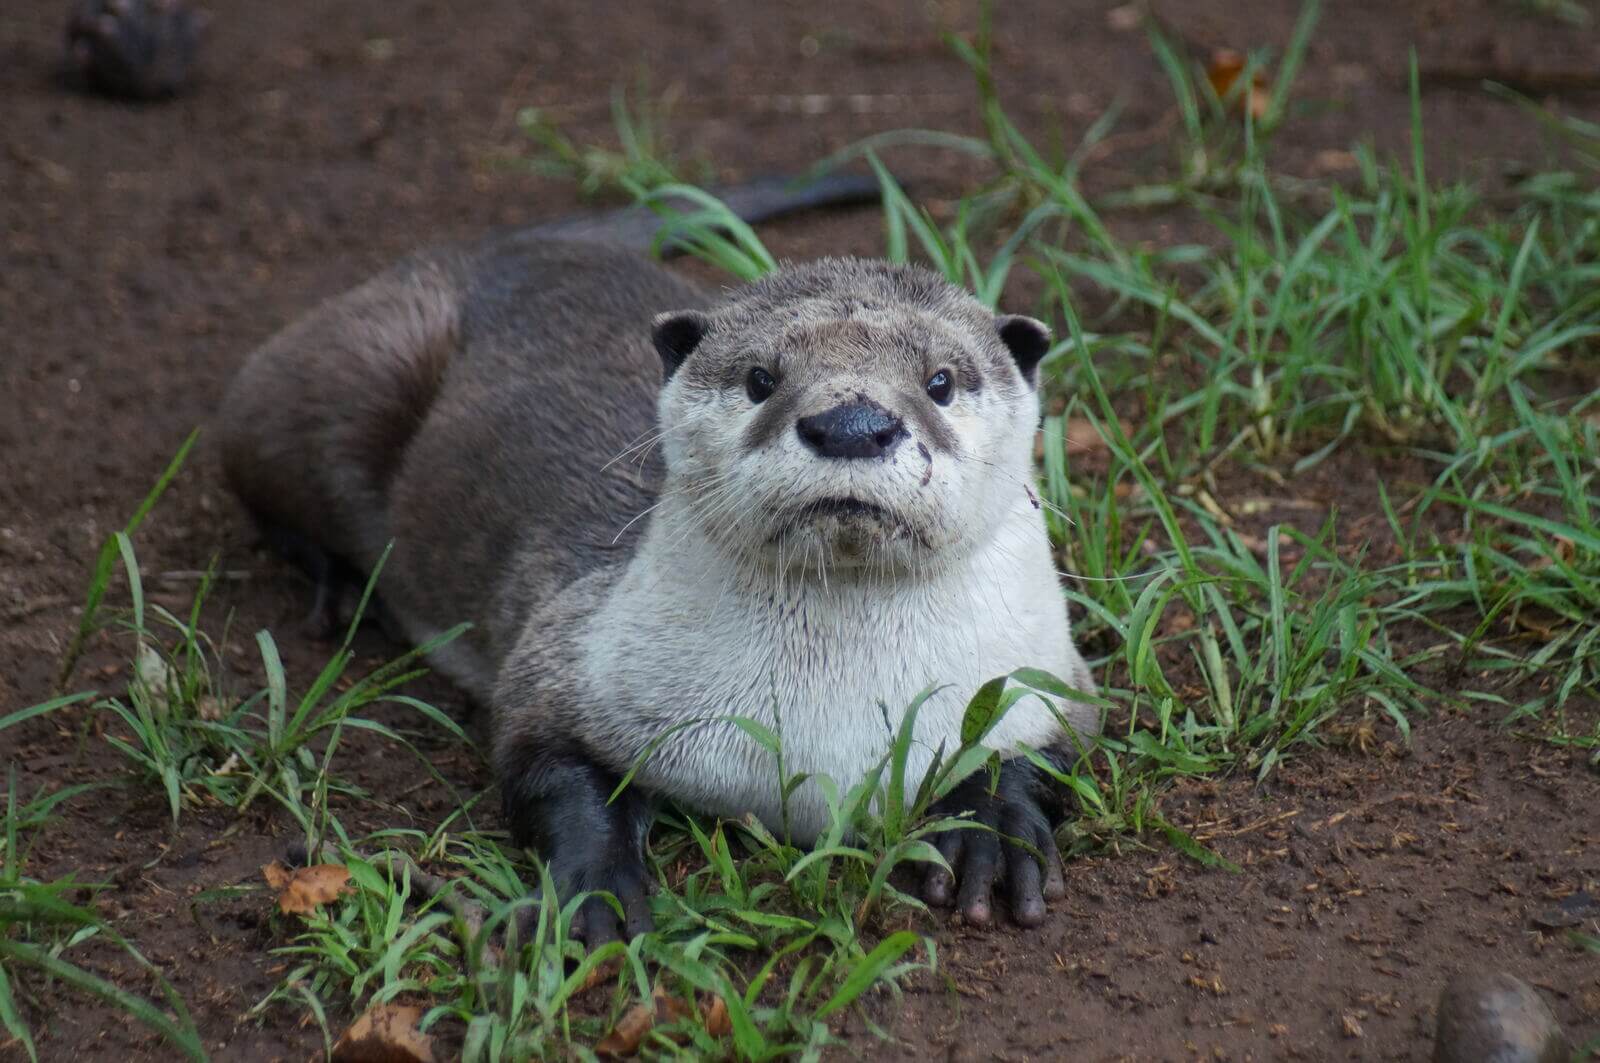 A gray and white clawless otter.